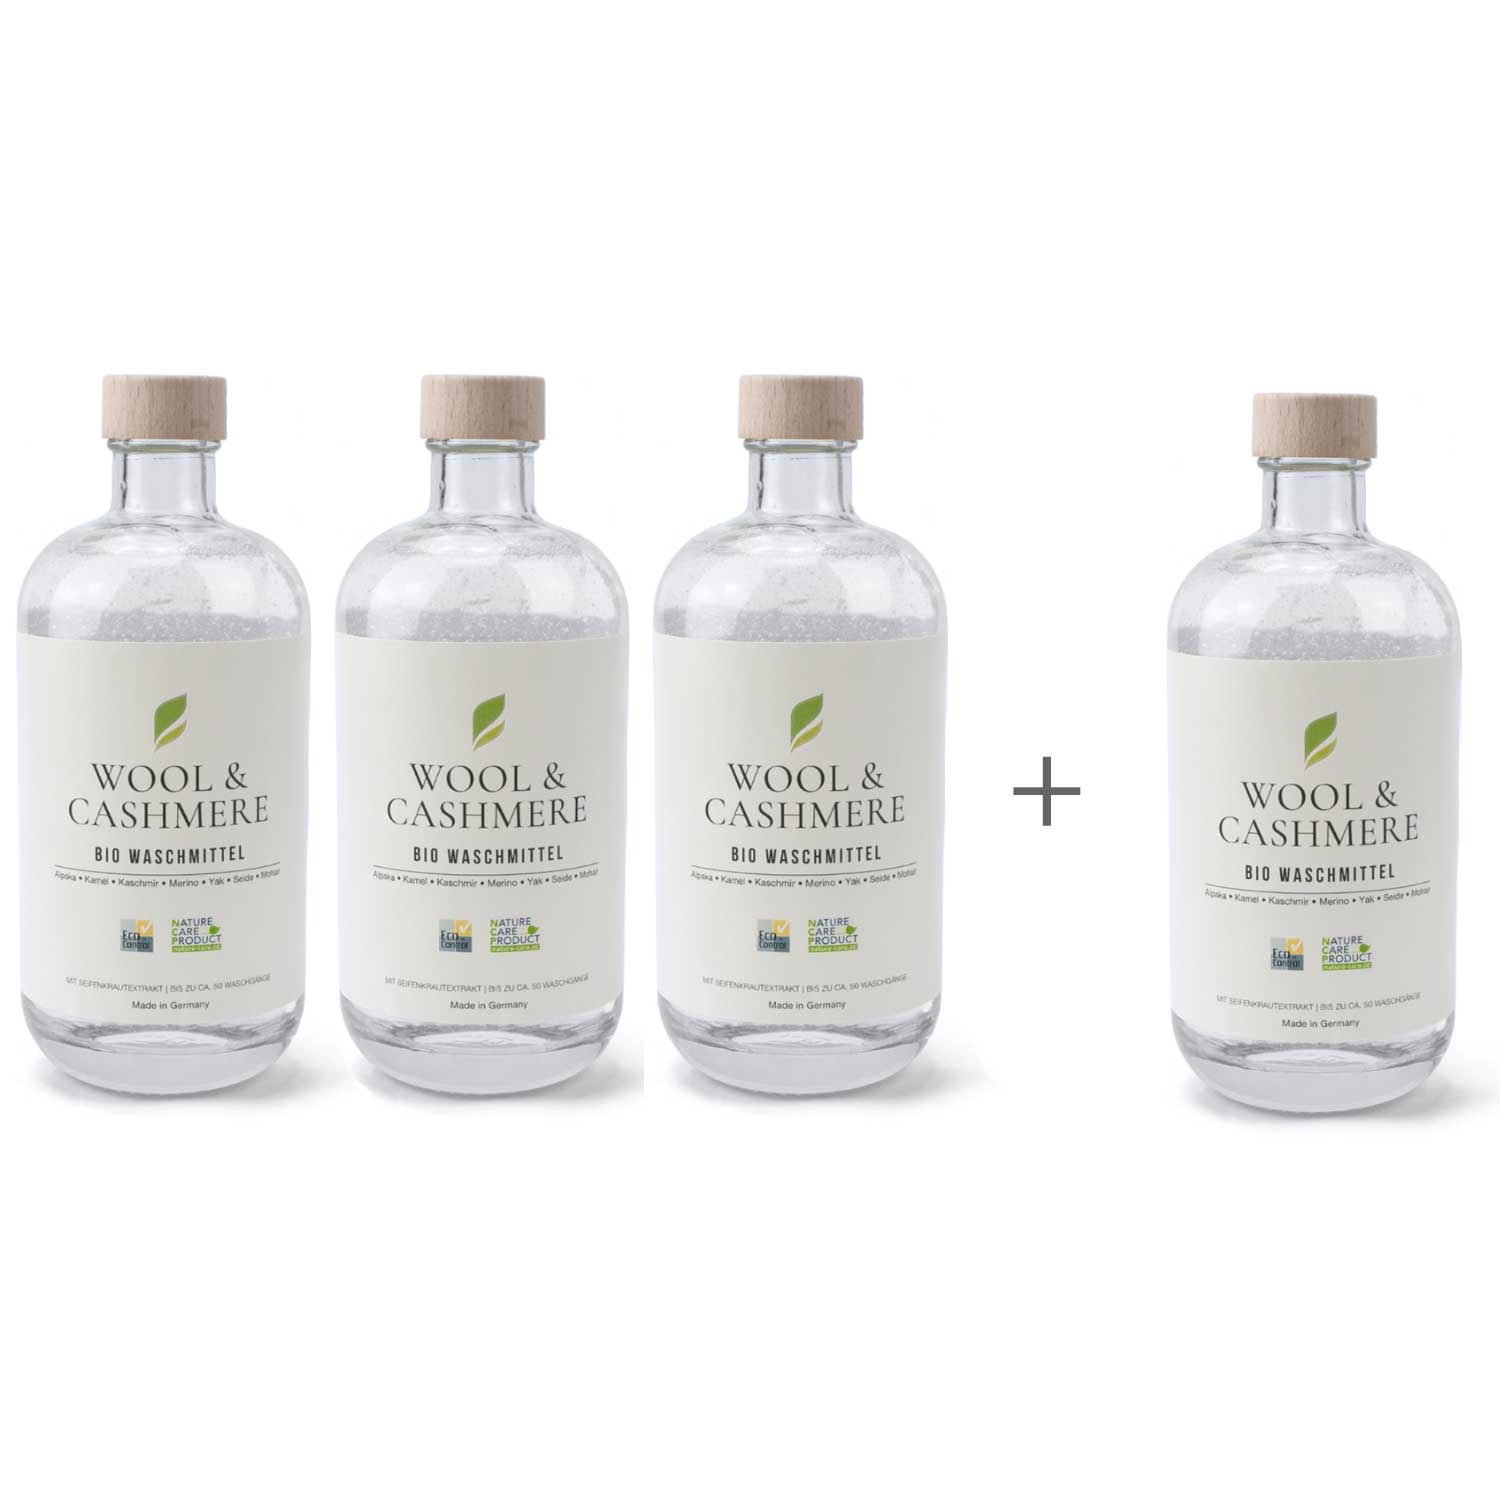 3 x 500ml + 1 bottle free organic detergent Wool & Cashmere Concentrate VEGAN up to approx. 50 WASHES Delicate detergent